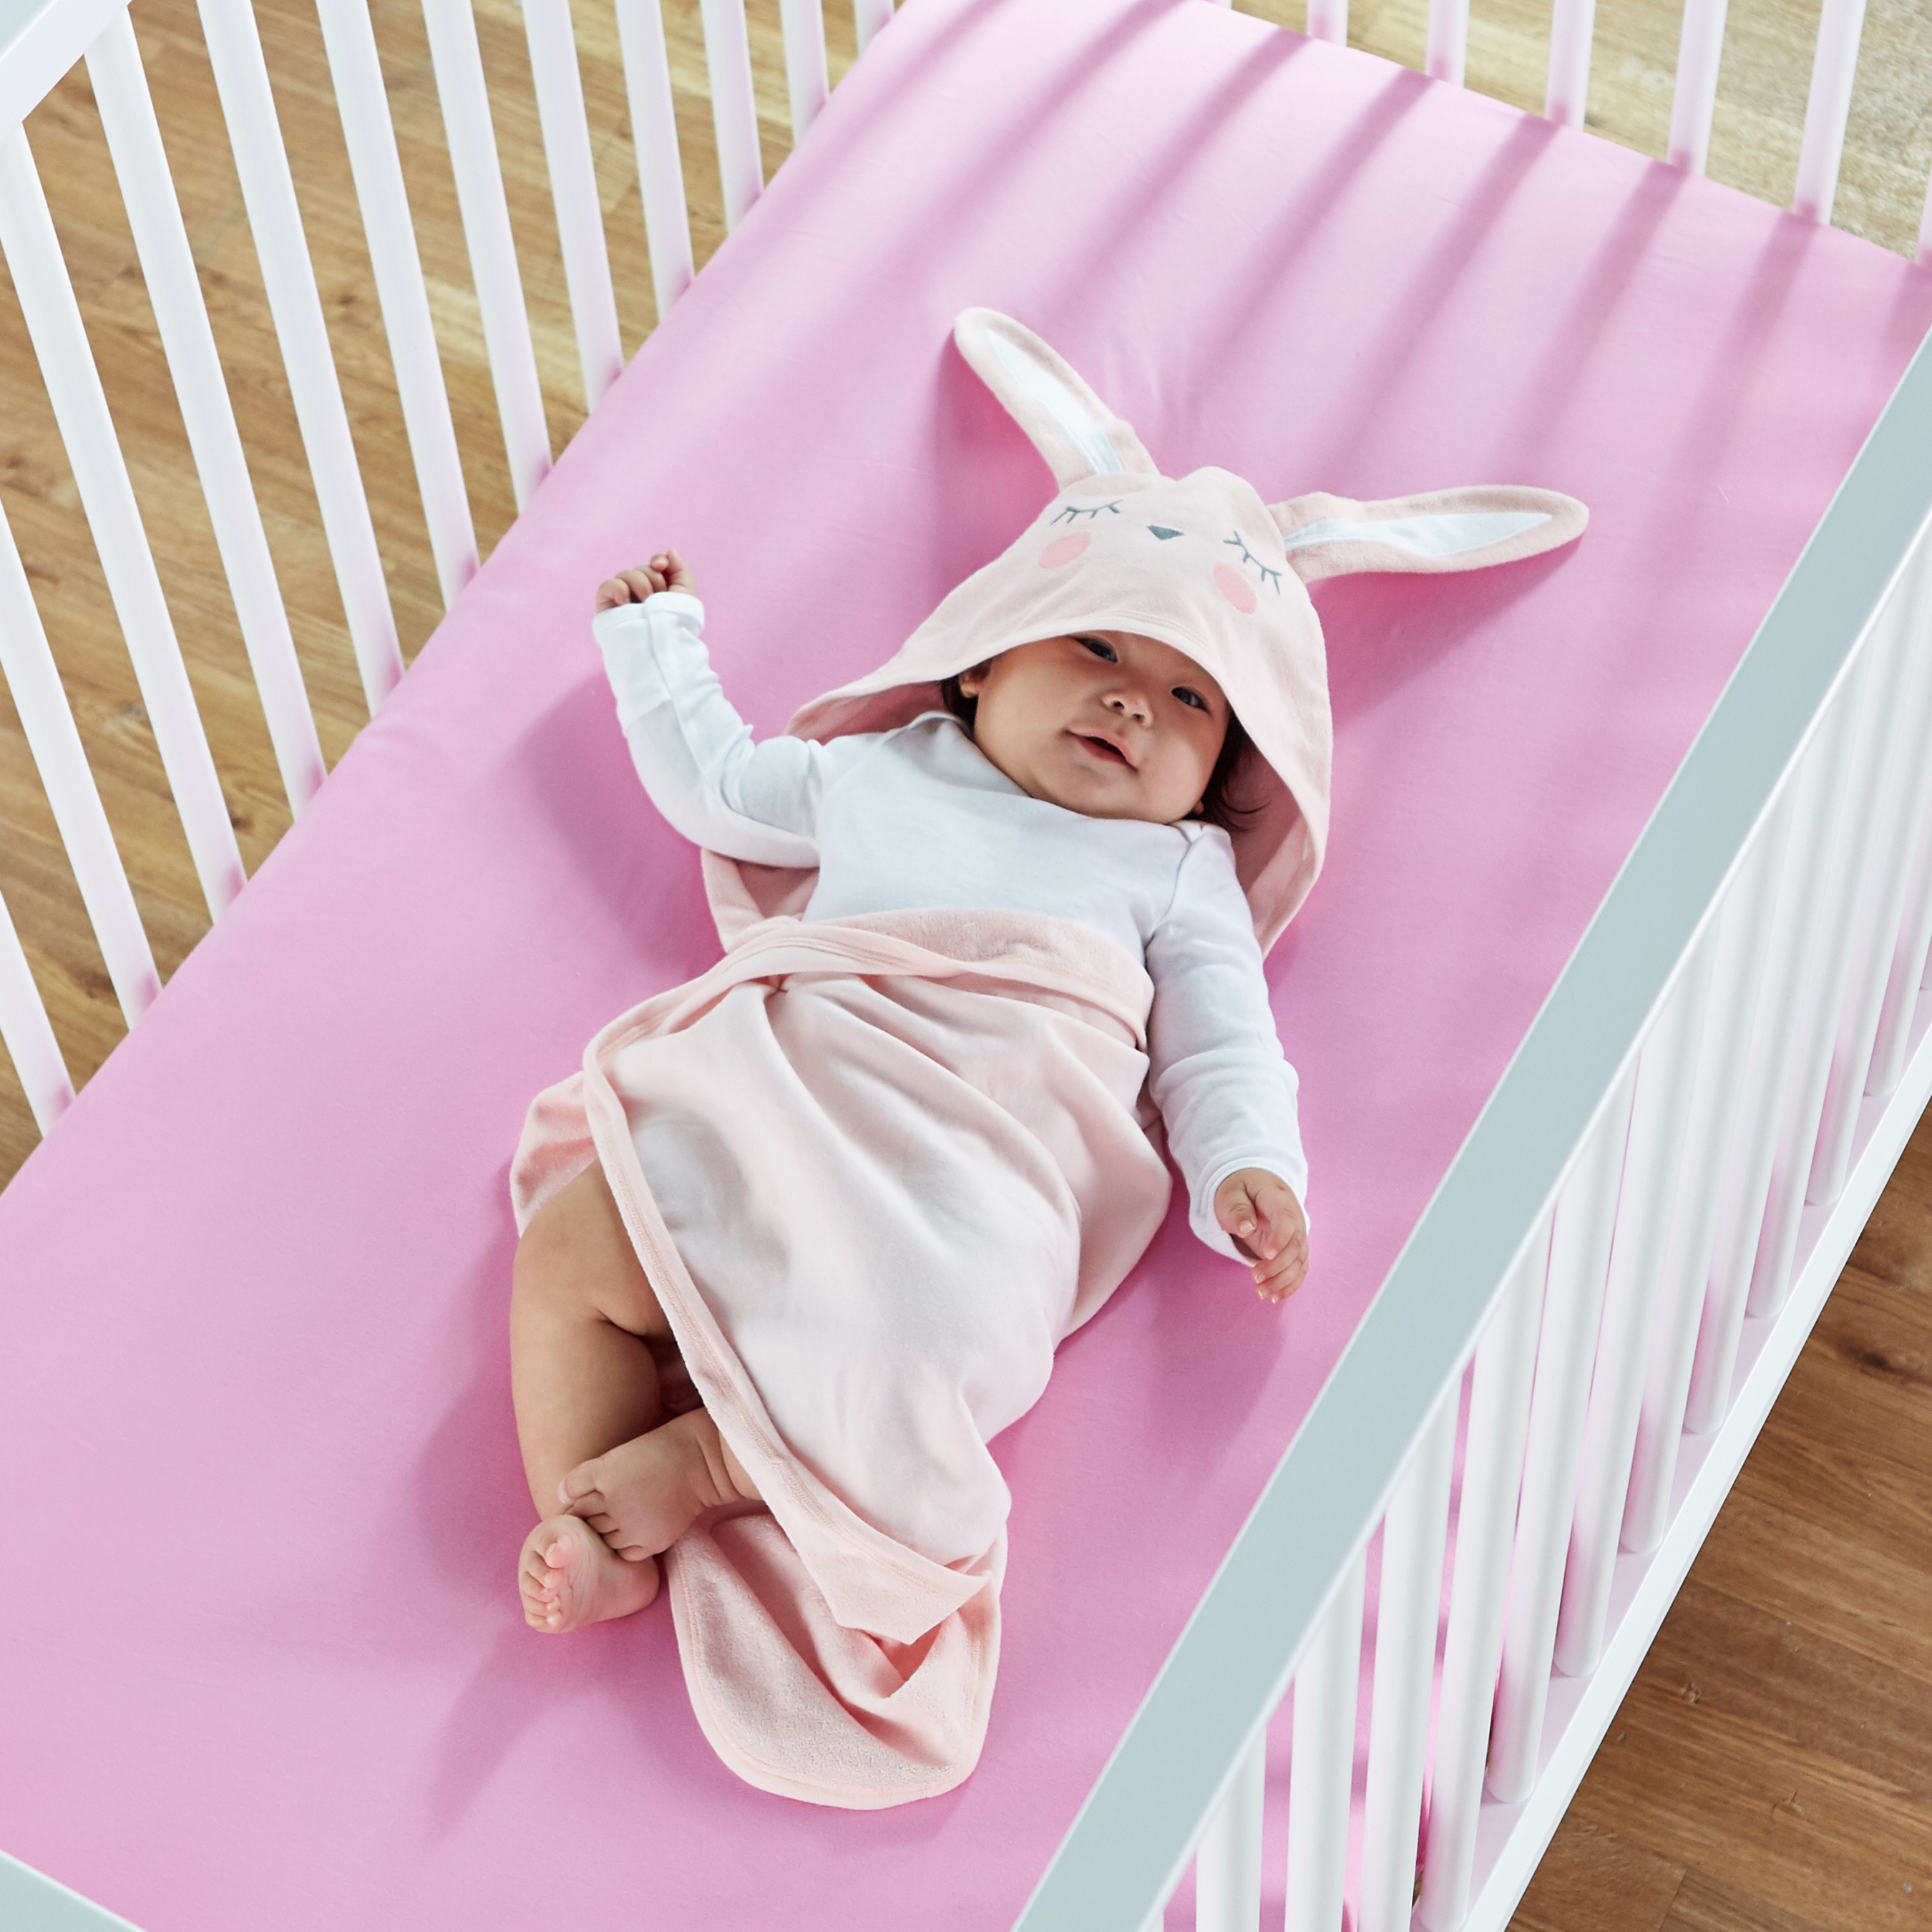 Little Star Organic Terry Cloth Hooded Bath Towel, Pink Bunny - image 4 of 5